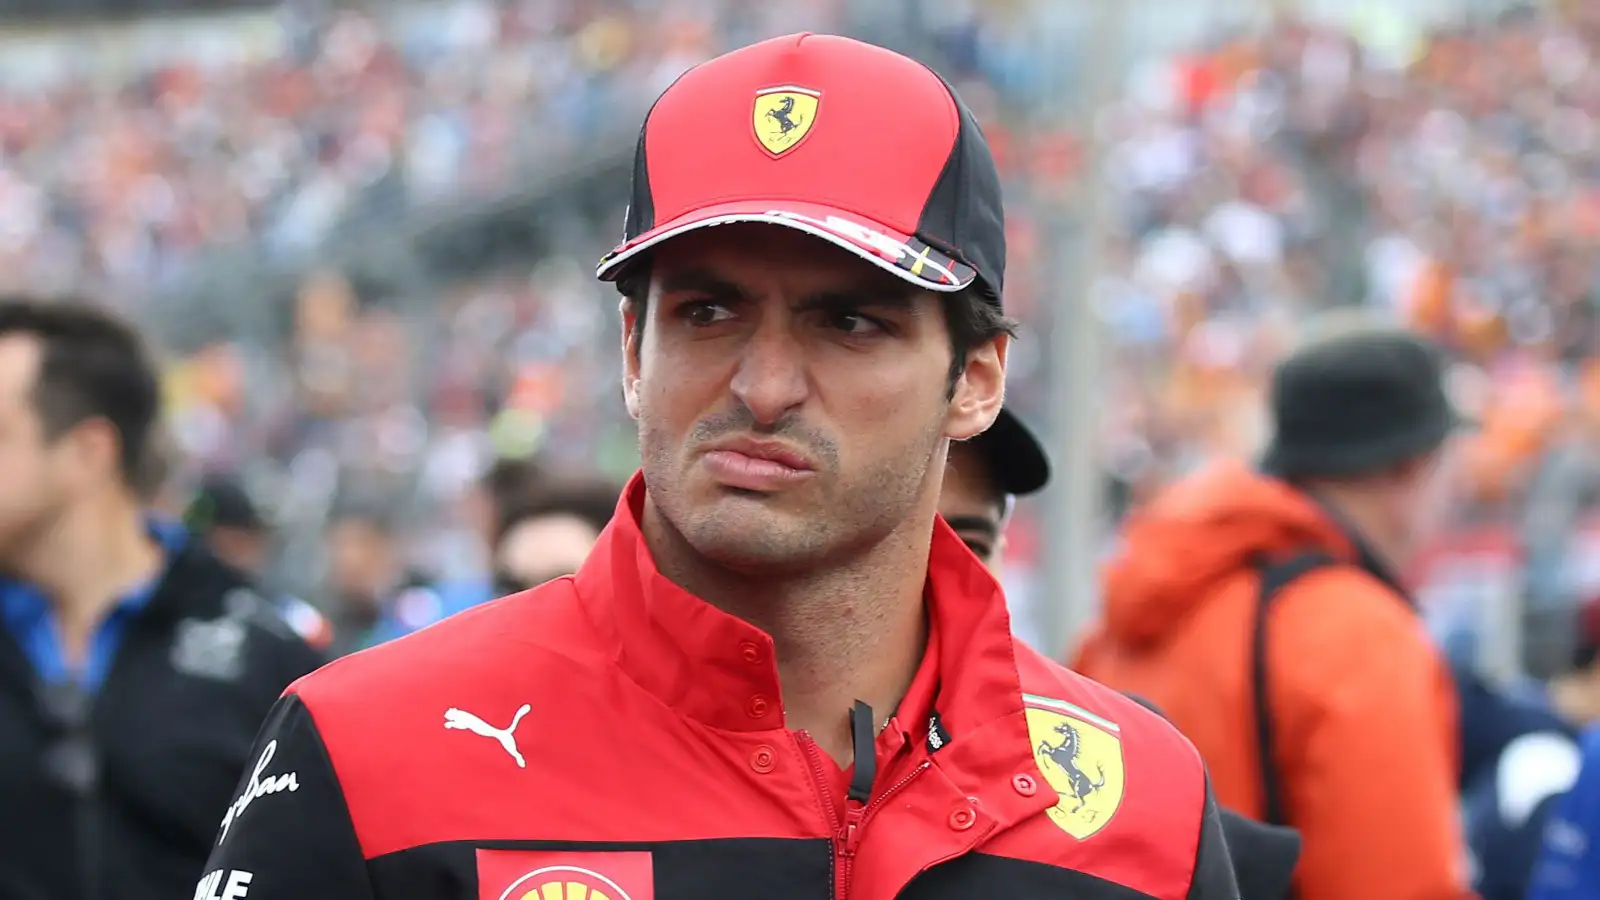 Carlos Sainz of Ferrari during drivers parade, pulling a face. Hungary July 2022